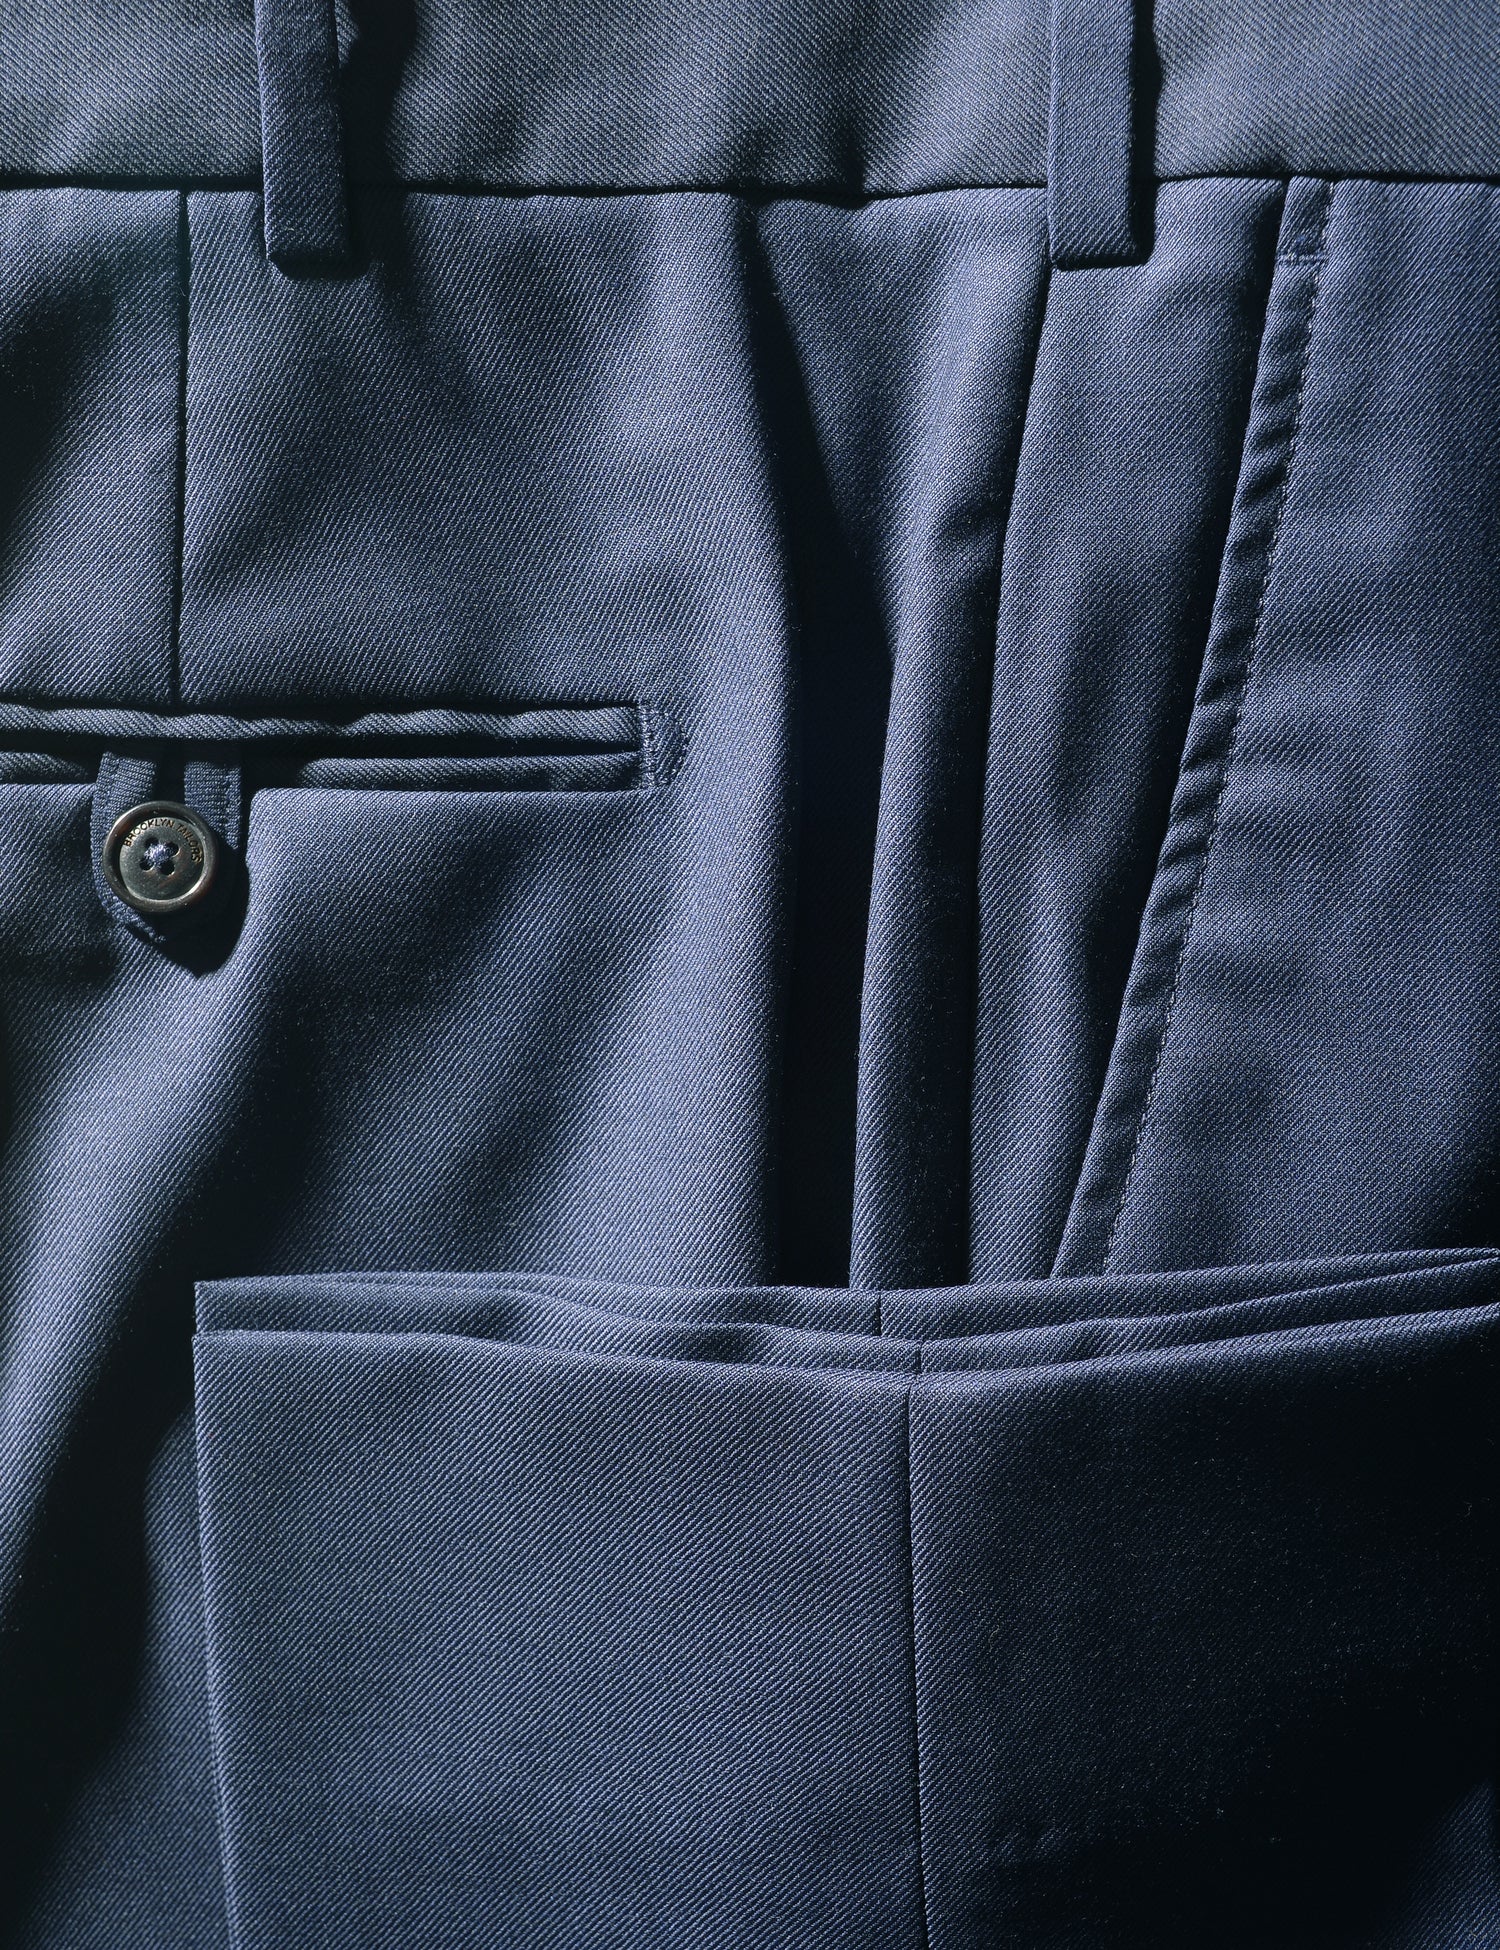 Detail shot of Brooklyn Tailors BKT50 Tailored Trouser in Super 120s Twill - Bright Navy showing back pocket, side pocket, and cuff